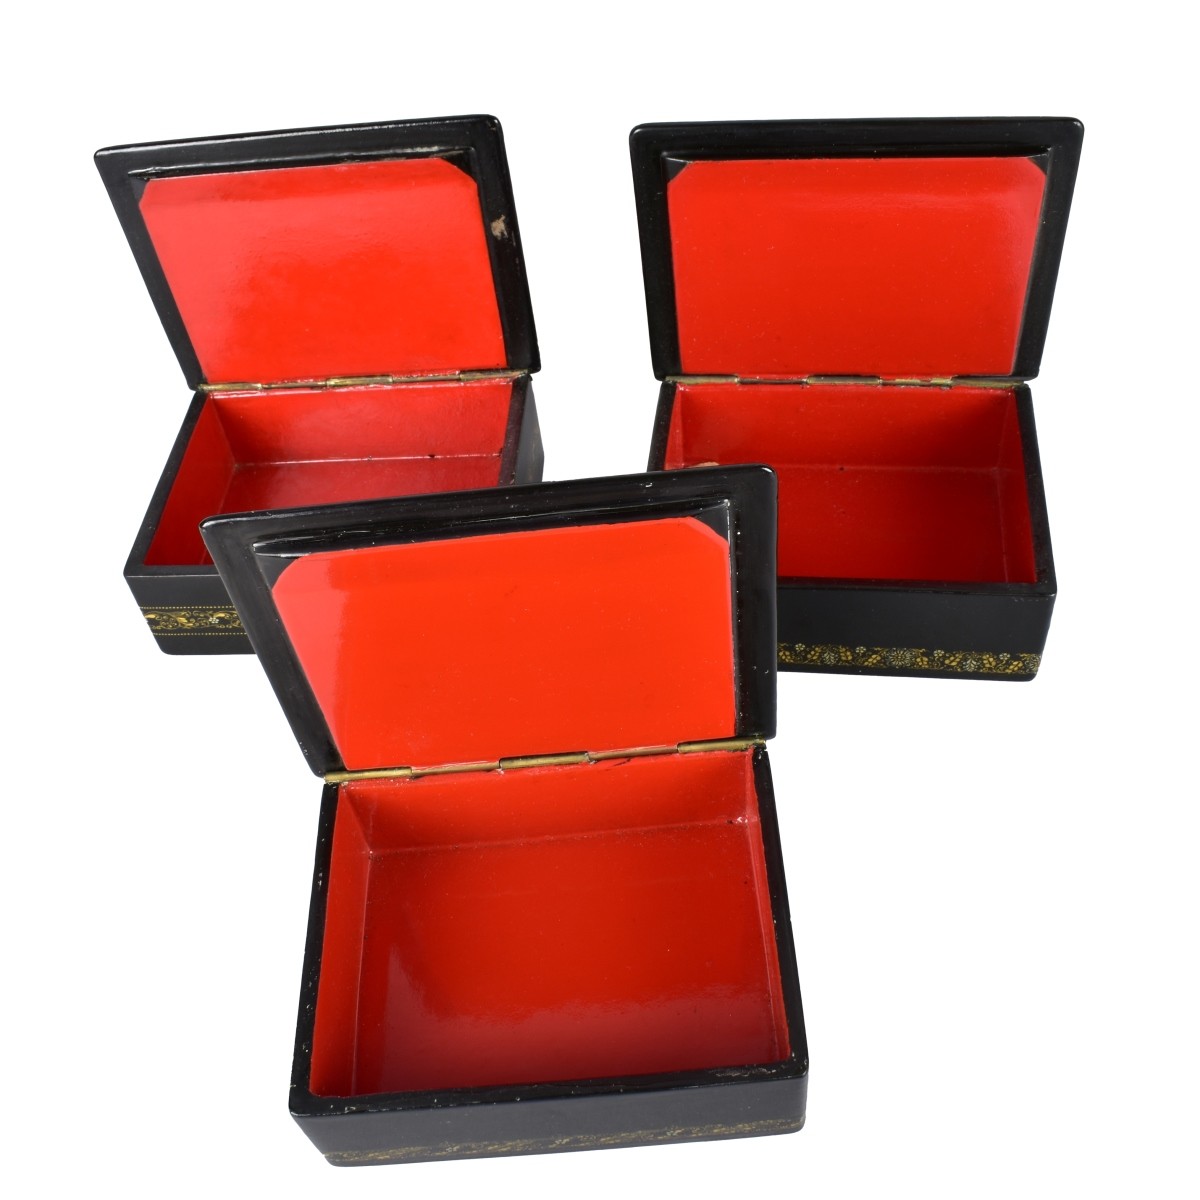 Three Vintage Russian Lacquer Boxes